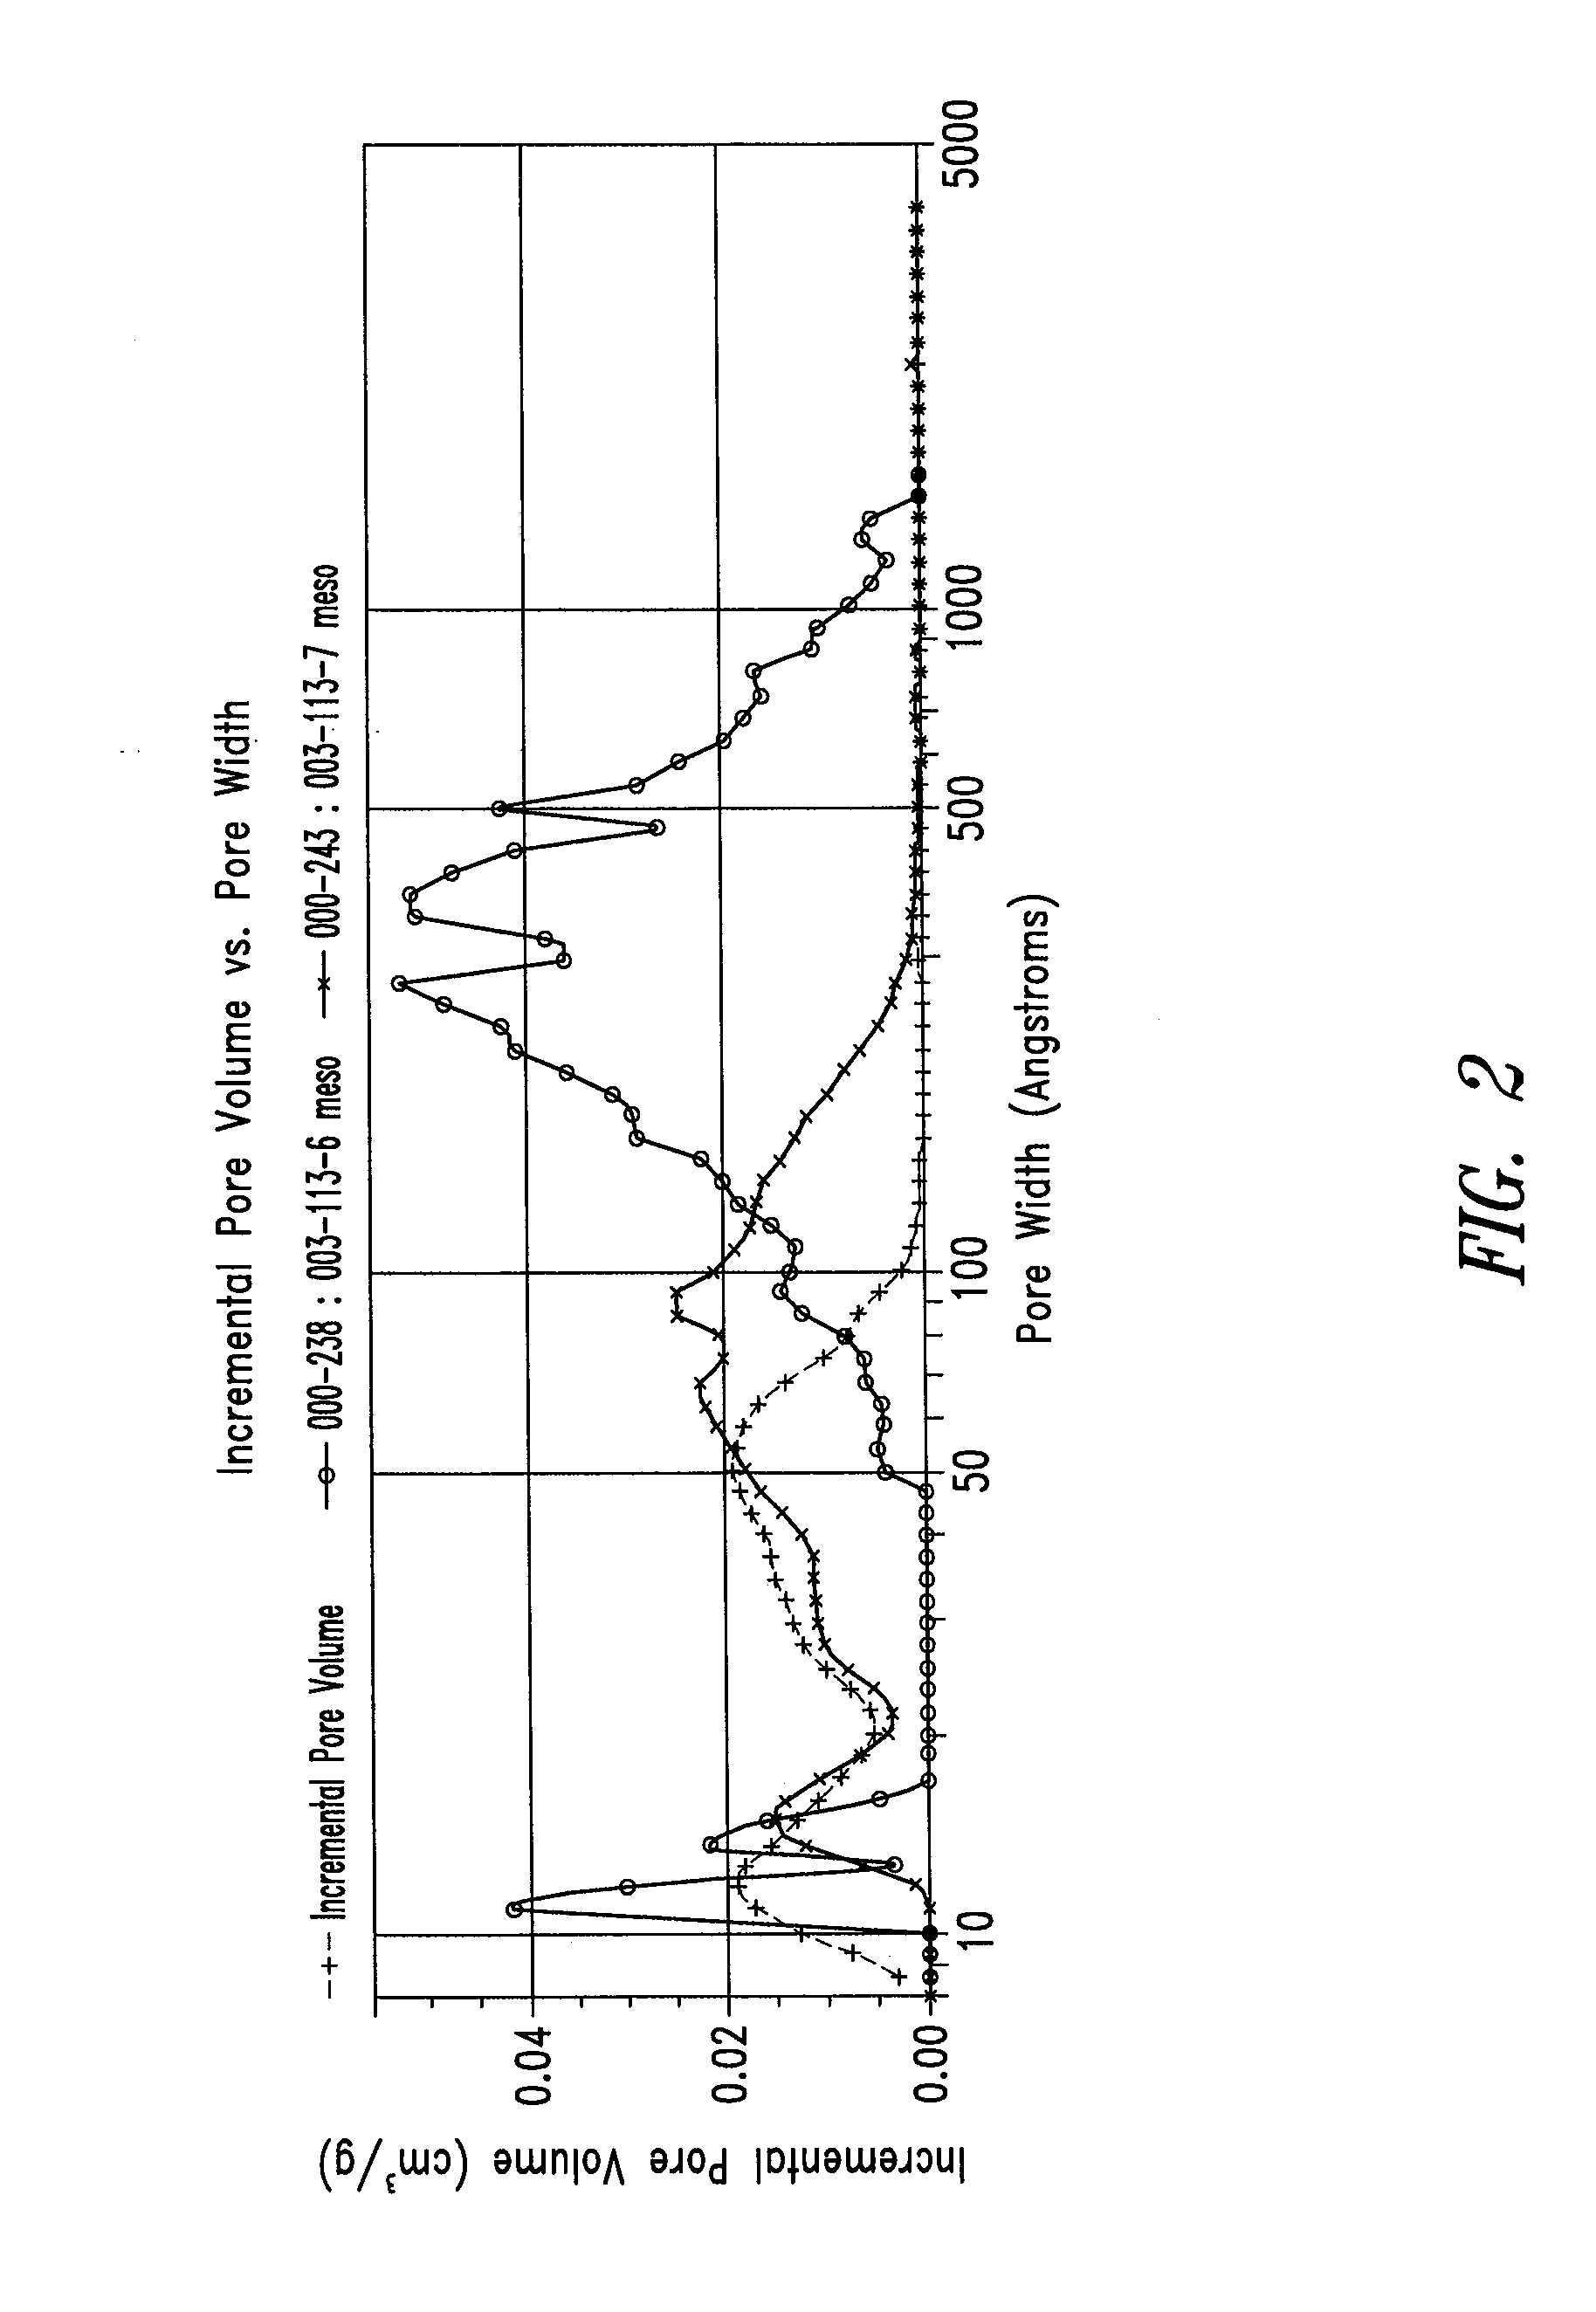 Ultrapure synthetic carbon materials